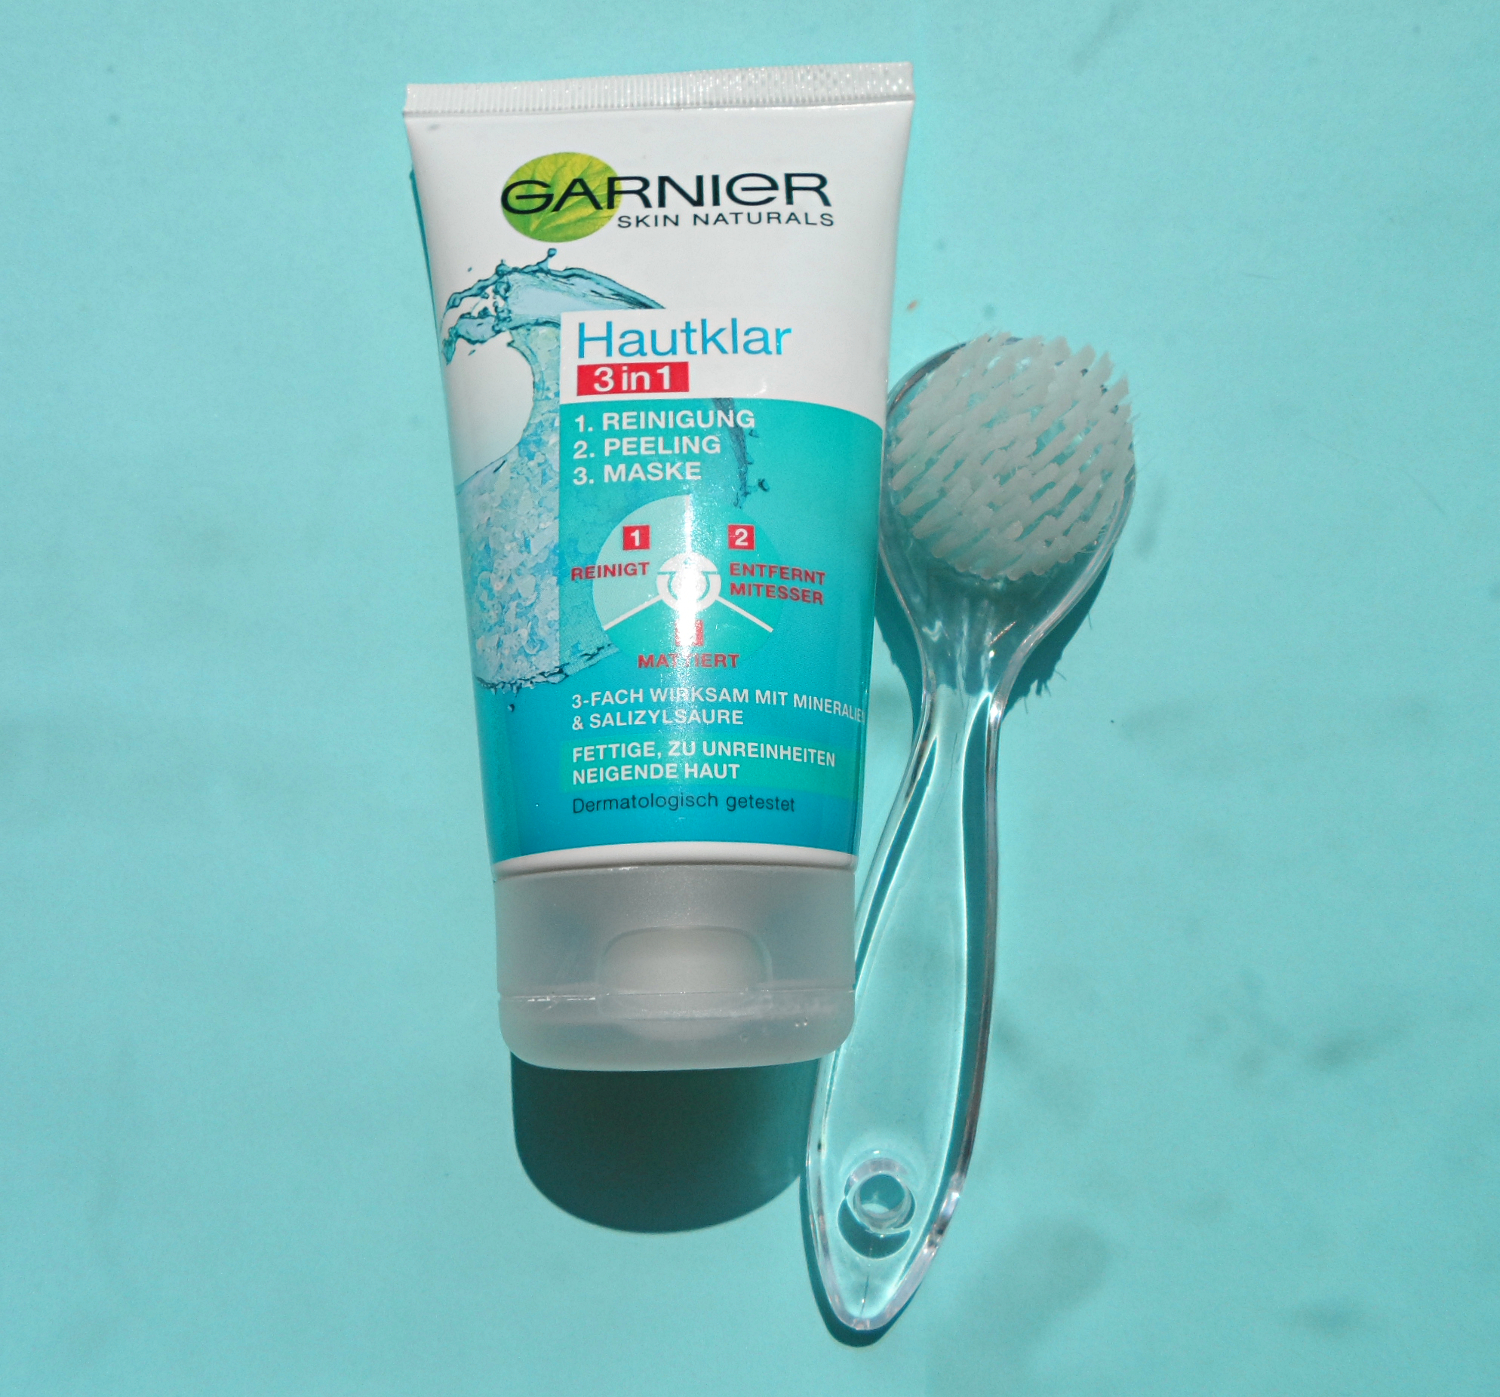 Ebelin Massage facial brush review garnier pure cleanse 3 in 1 review pictures